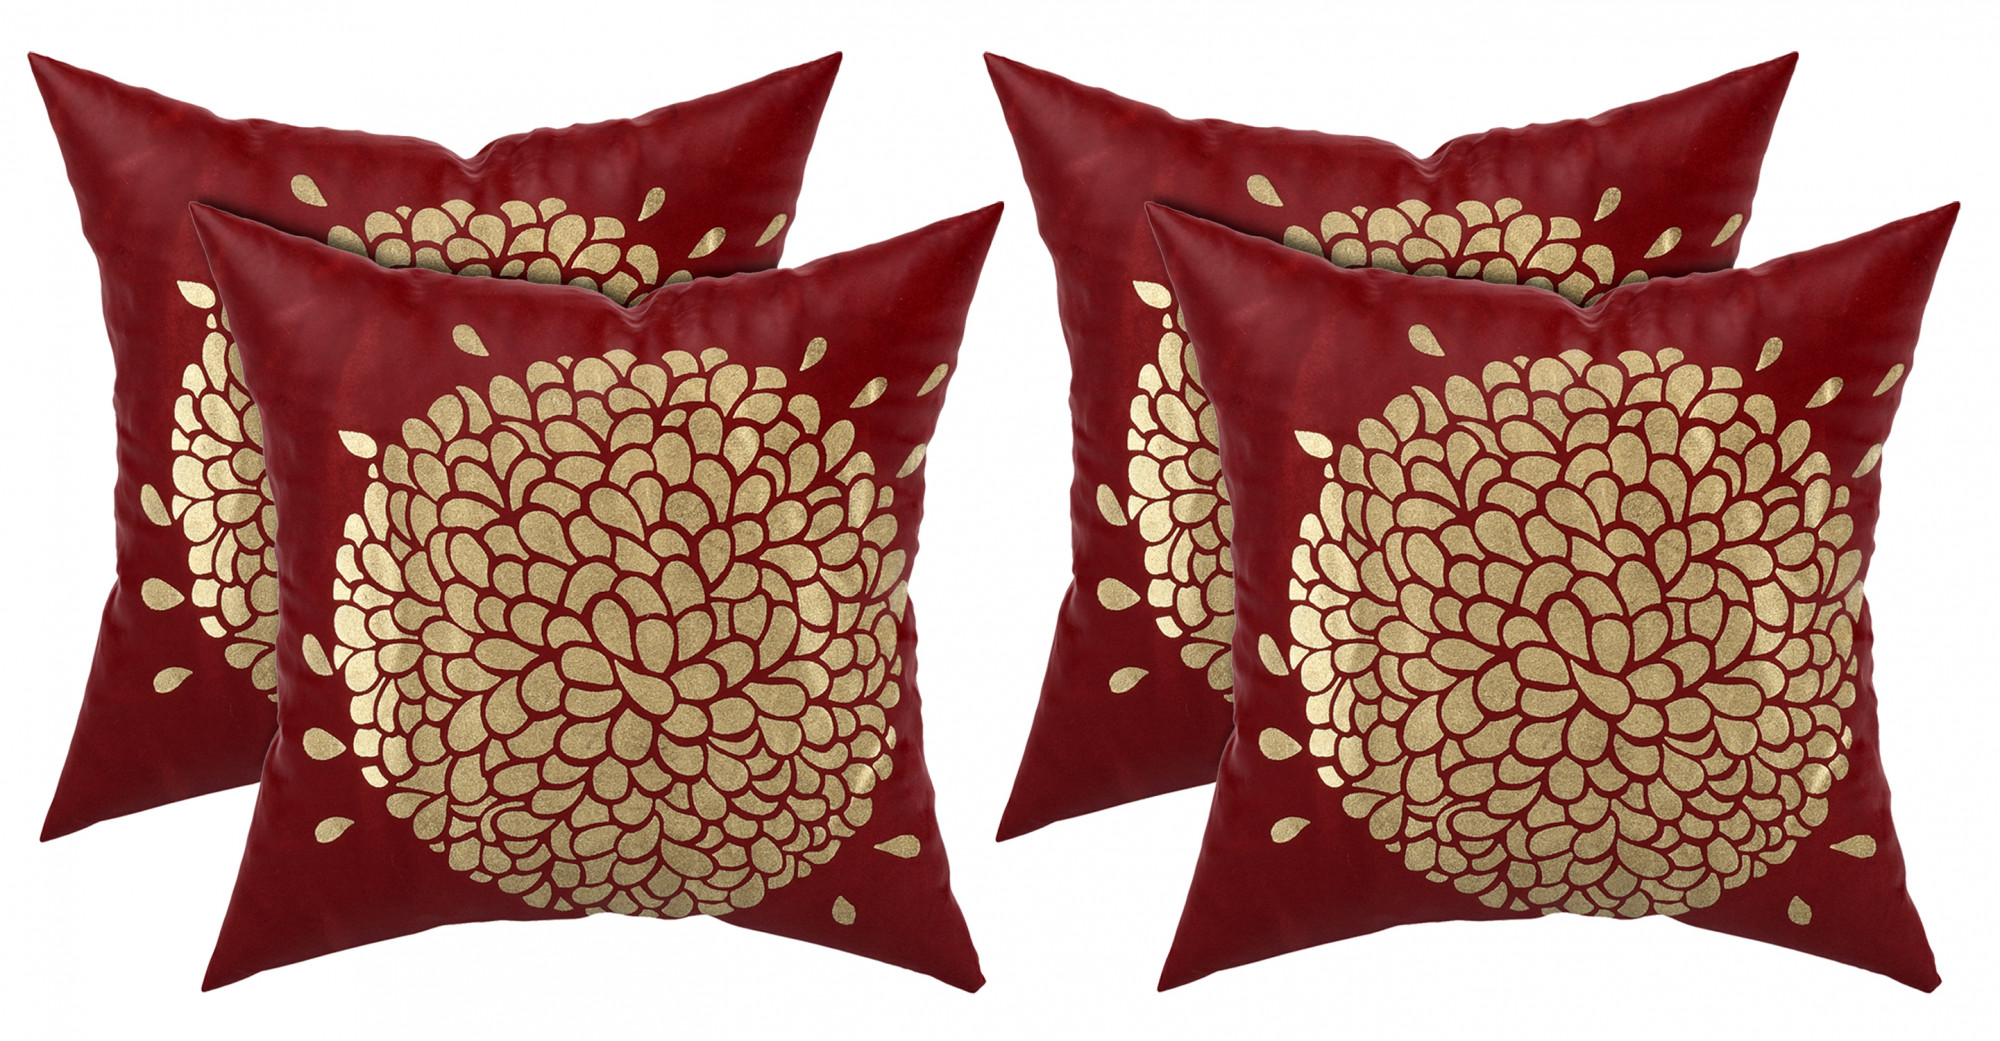 Kuber Industries Velvet Floral Design Soft Decorative Square Throw Pillow Cover, Cushion Covers, Pillow Case For Sofa Couch Bed Chair 16x16 Inch- (Maroon)